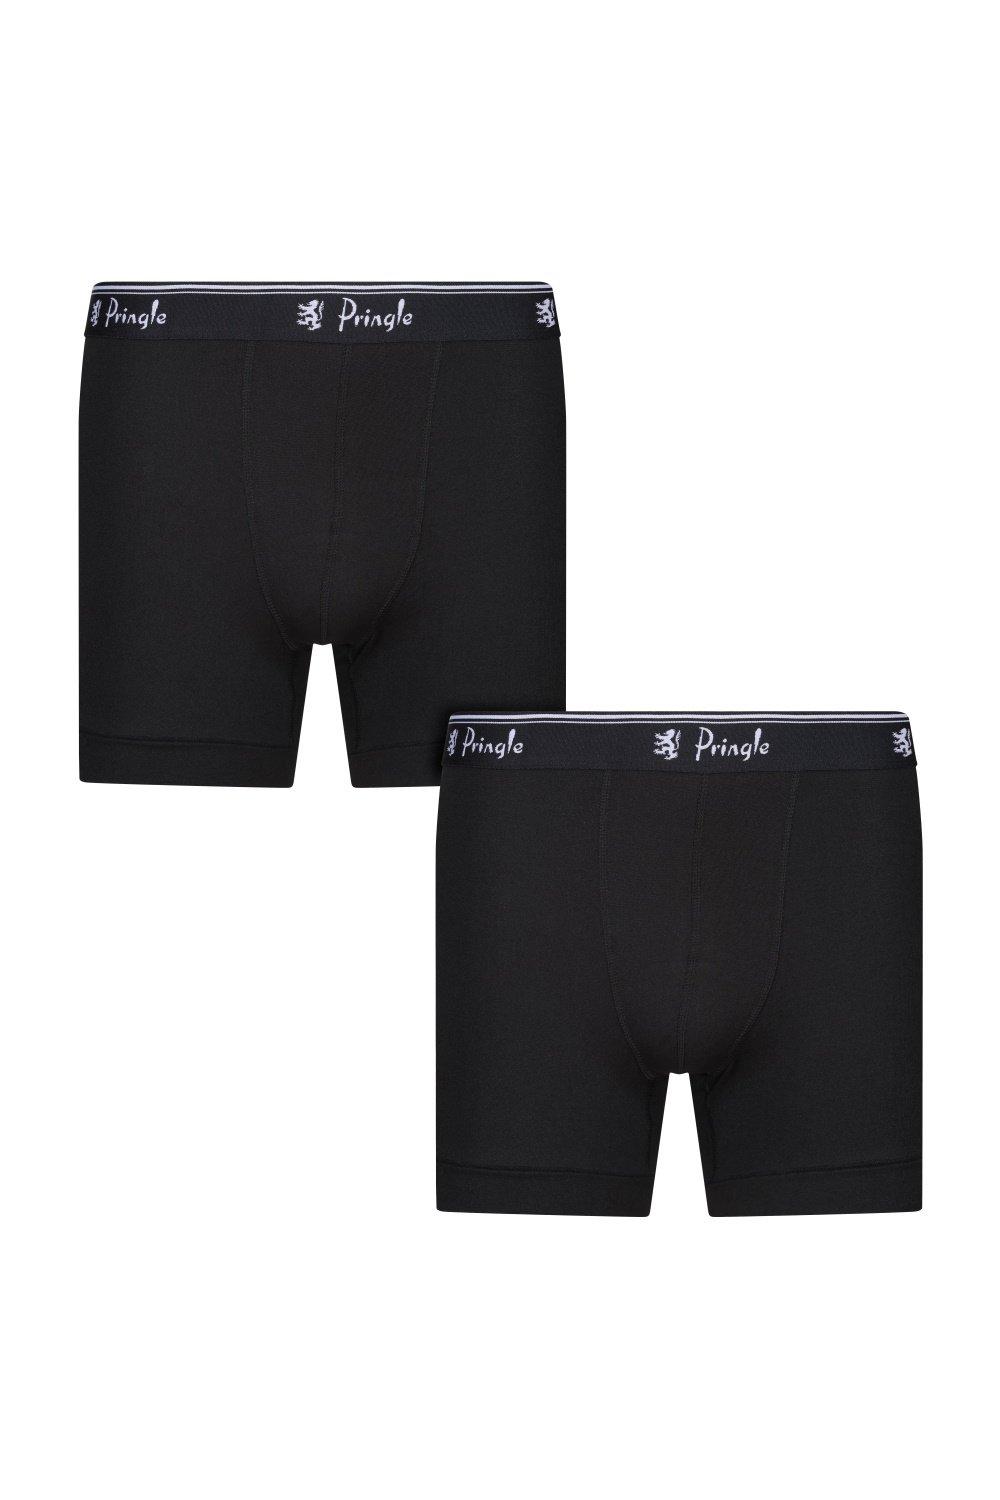 2 Pair Pack Sports Trunk